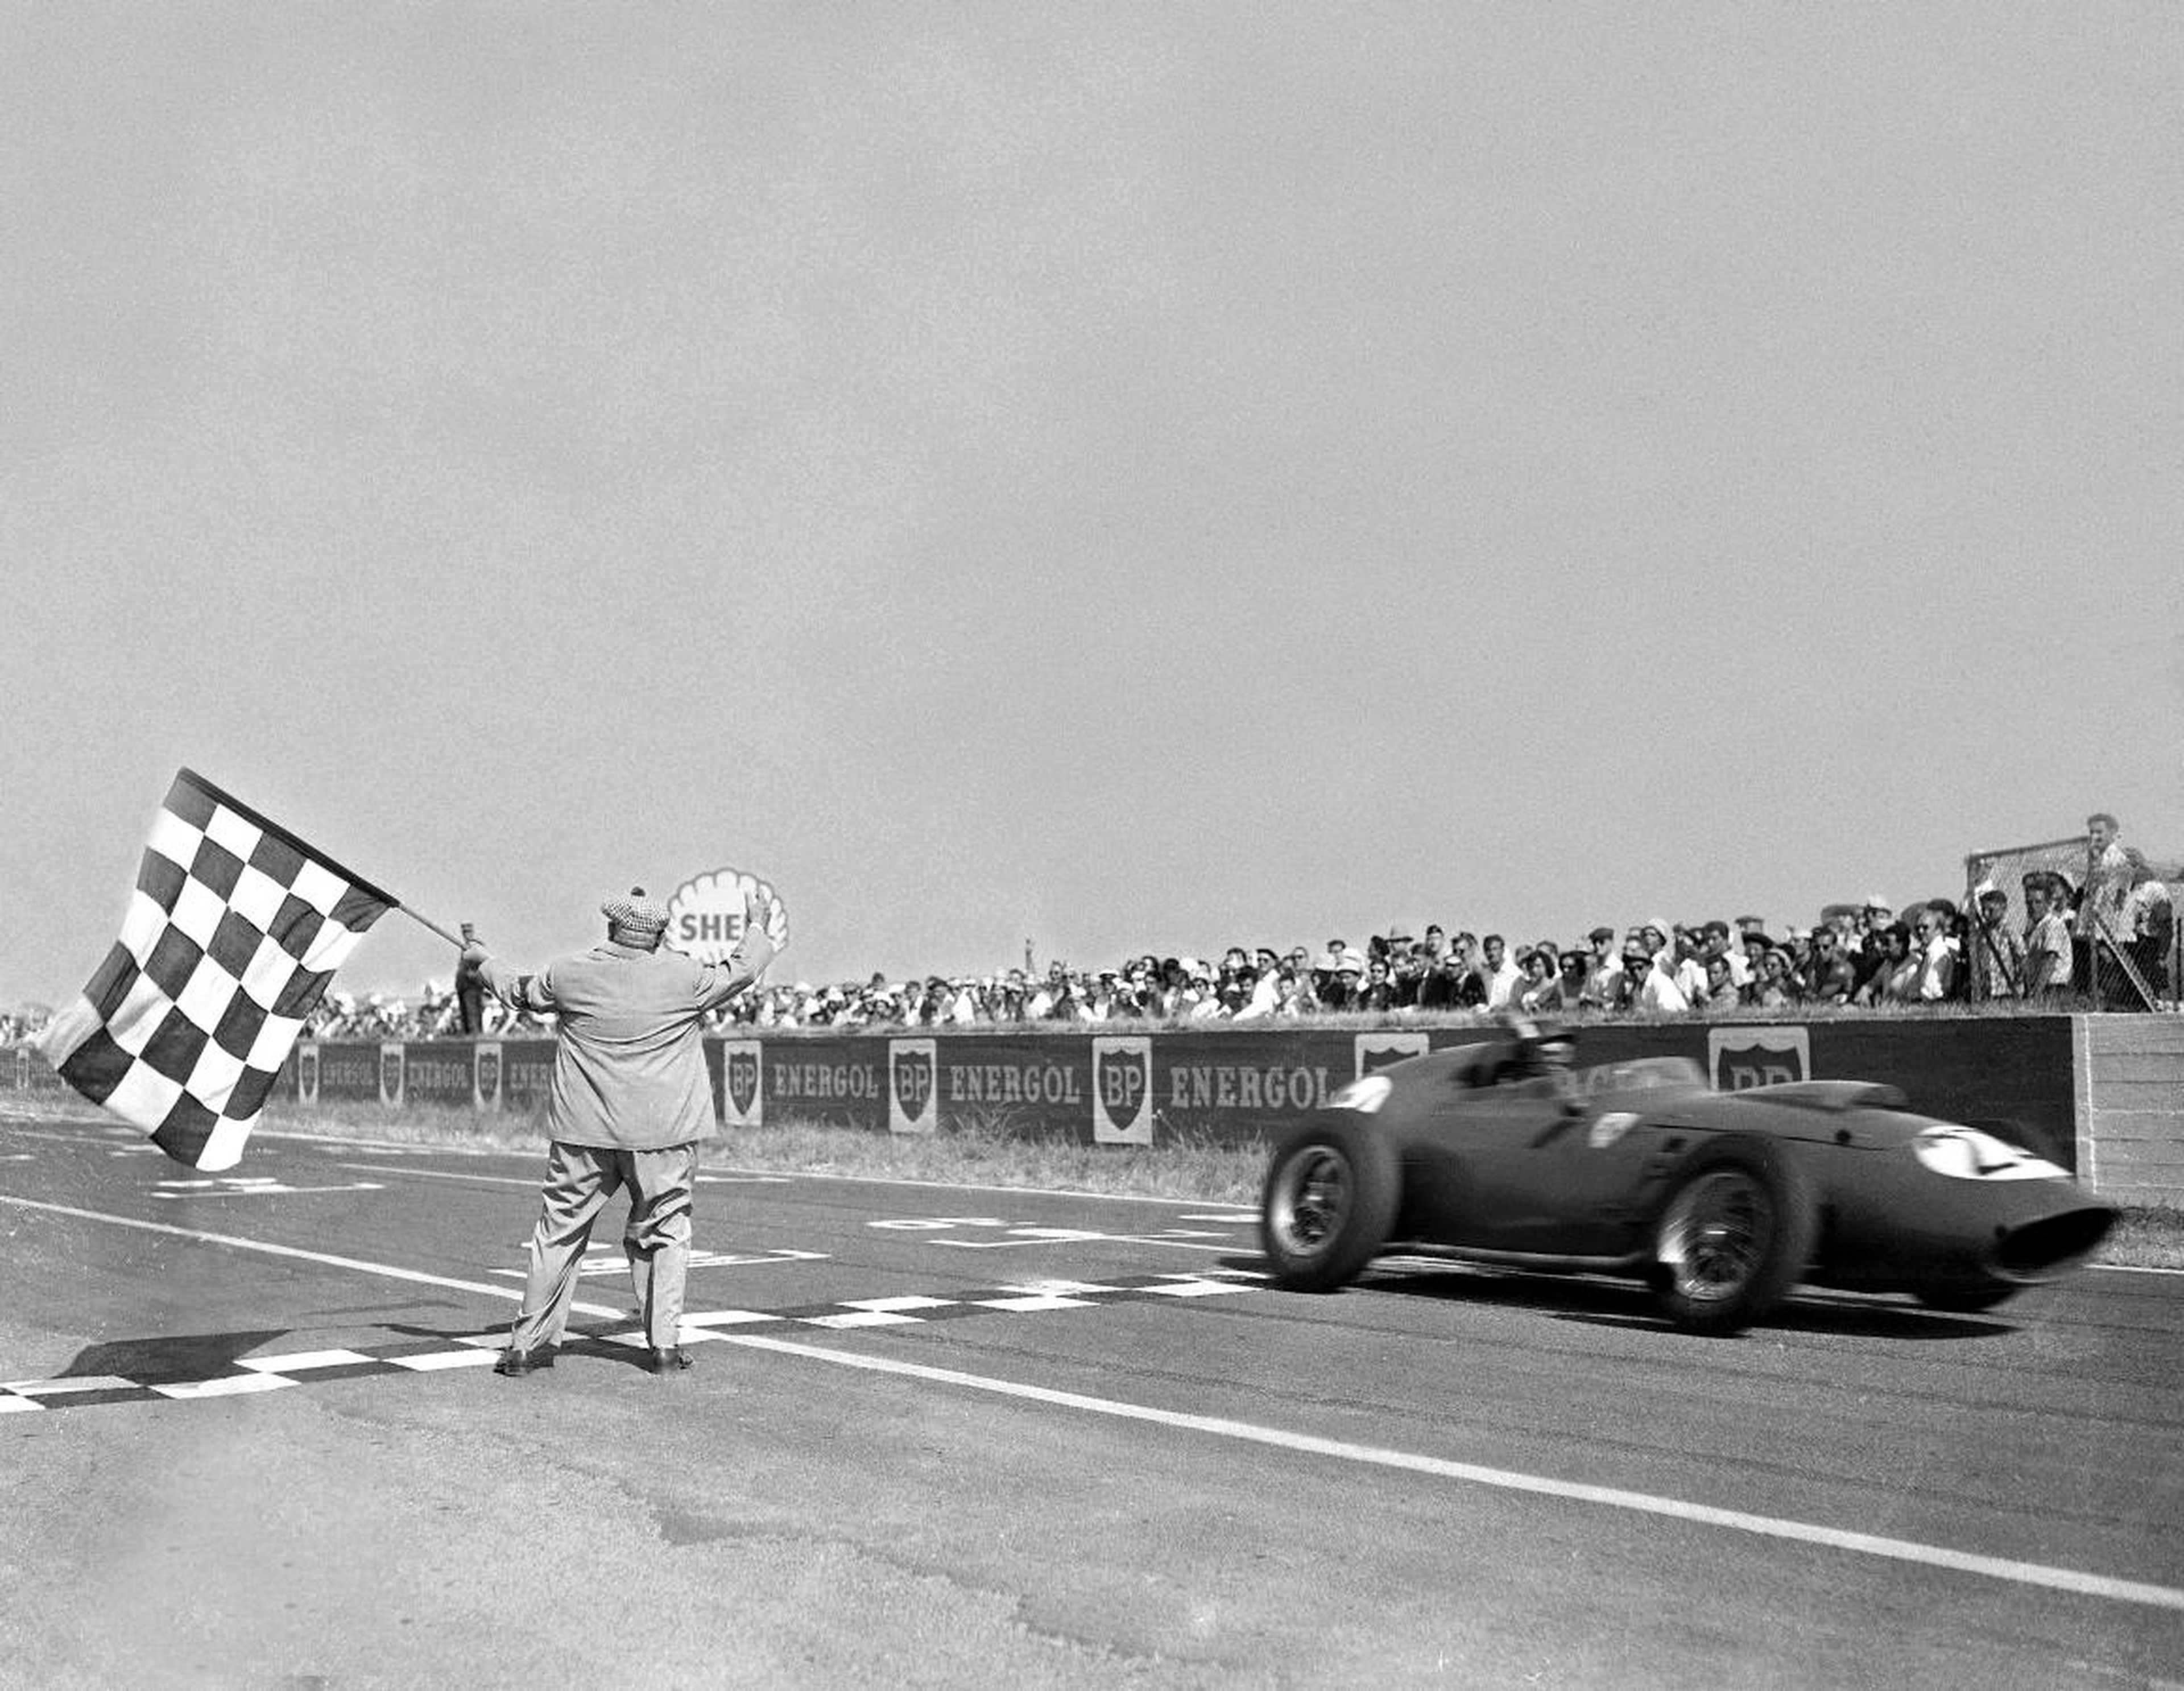 By the 1960s, Ferrari's cars demonstrated their prowess on and off the track.